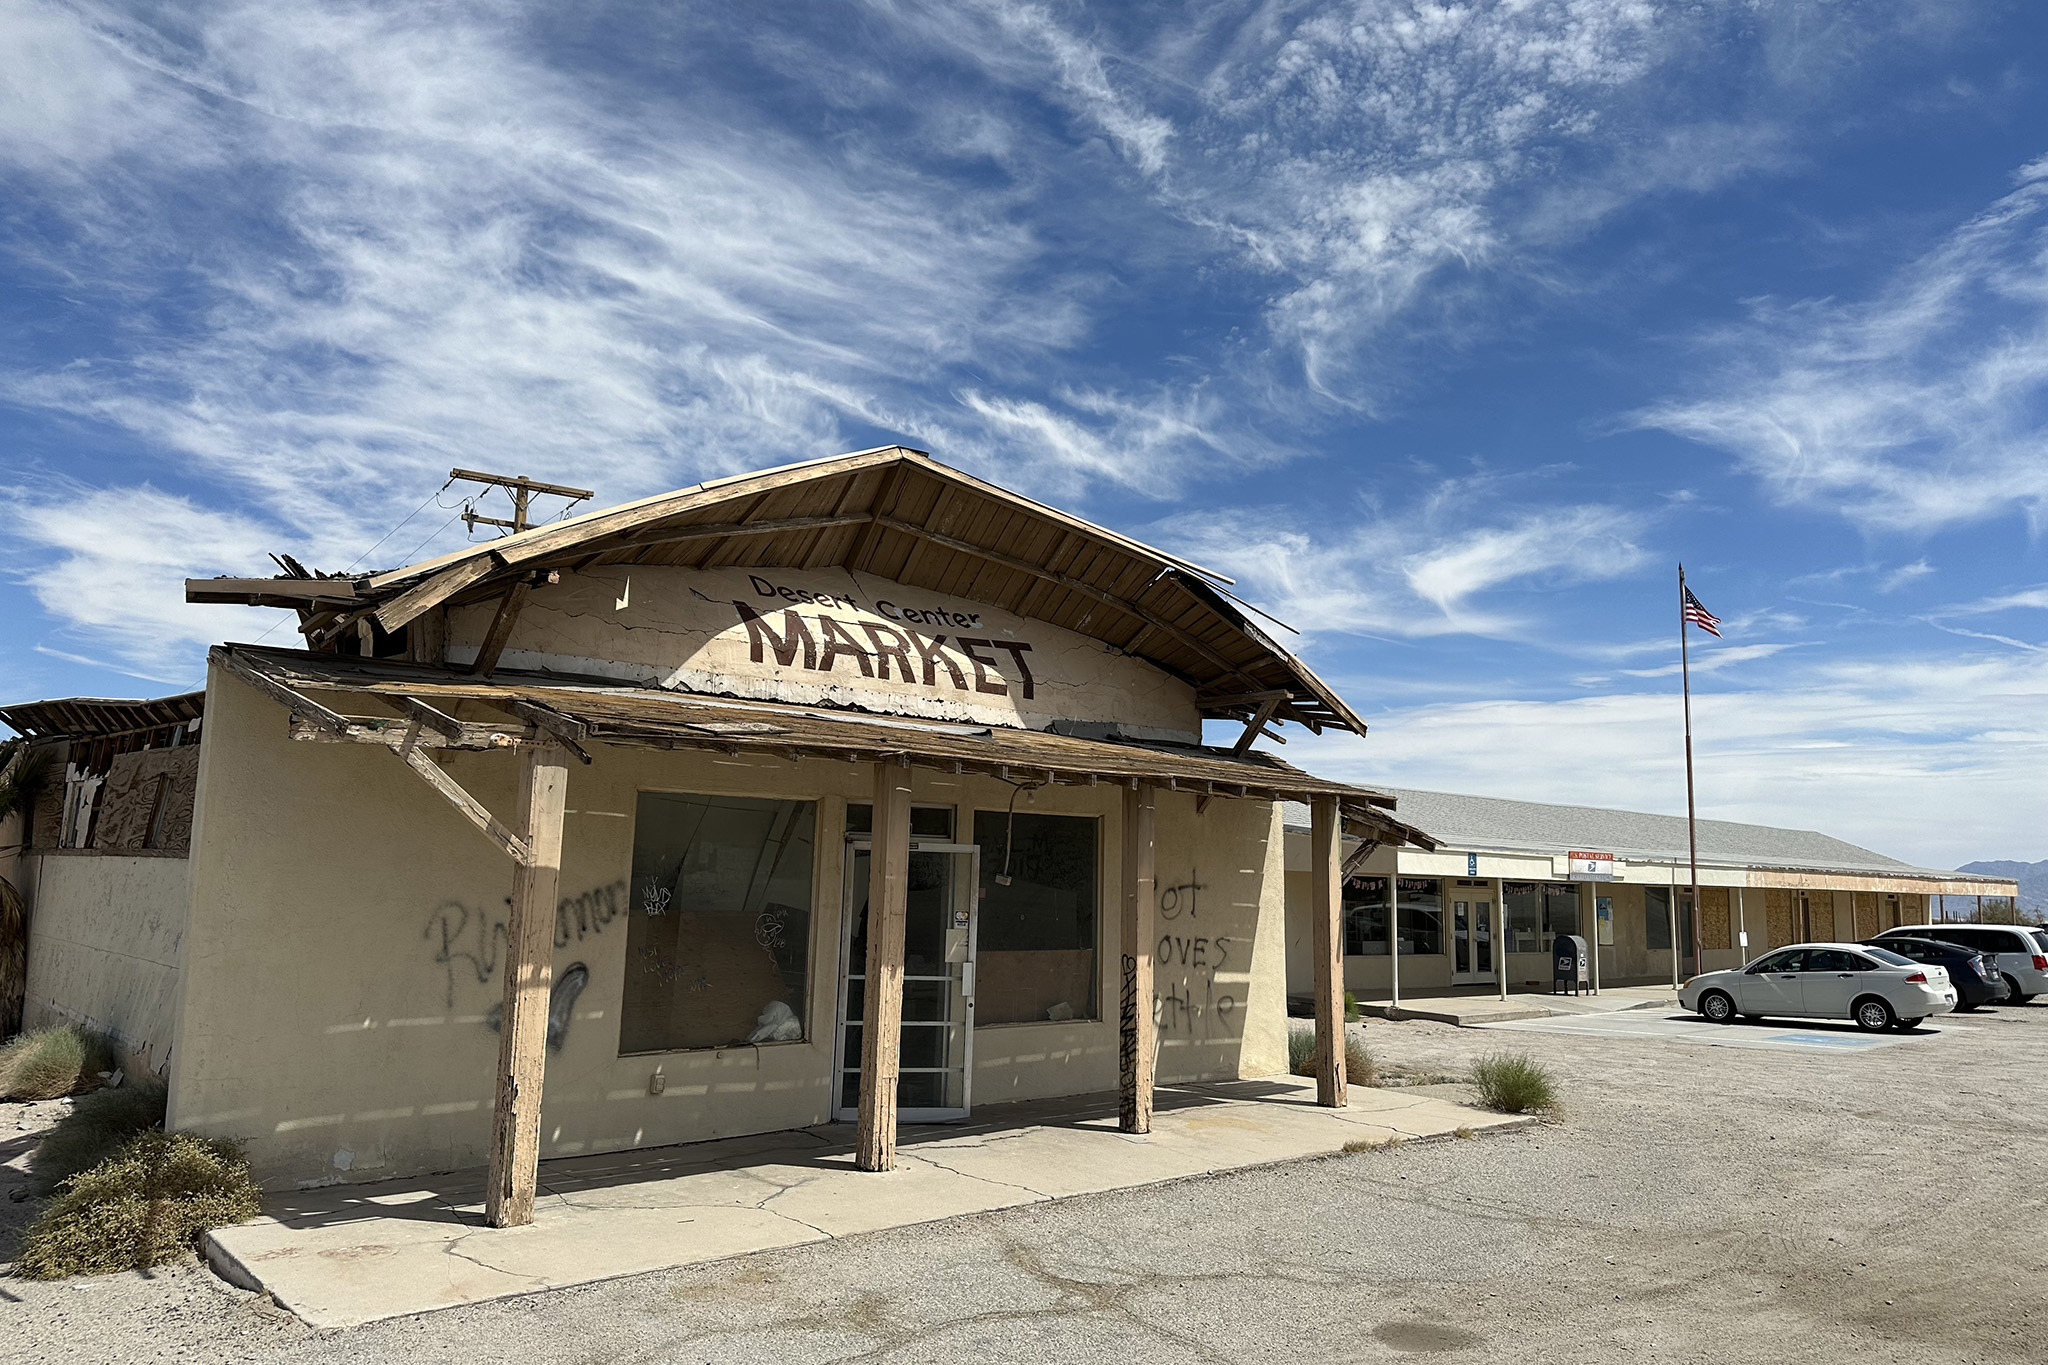 Mysterious company buys entire Calif. ghost town for $22.5M